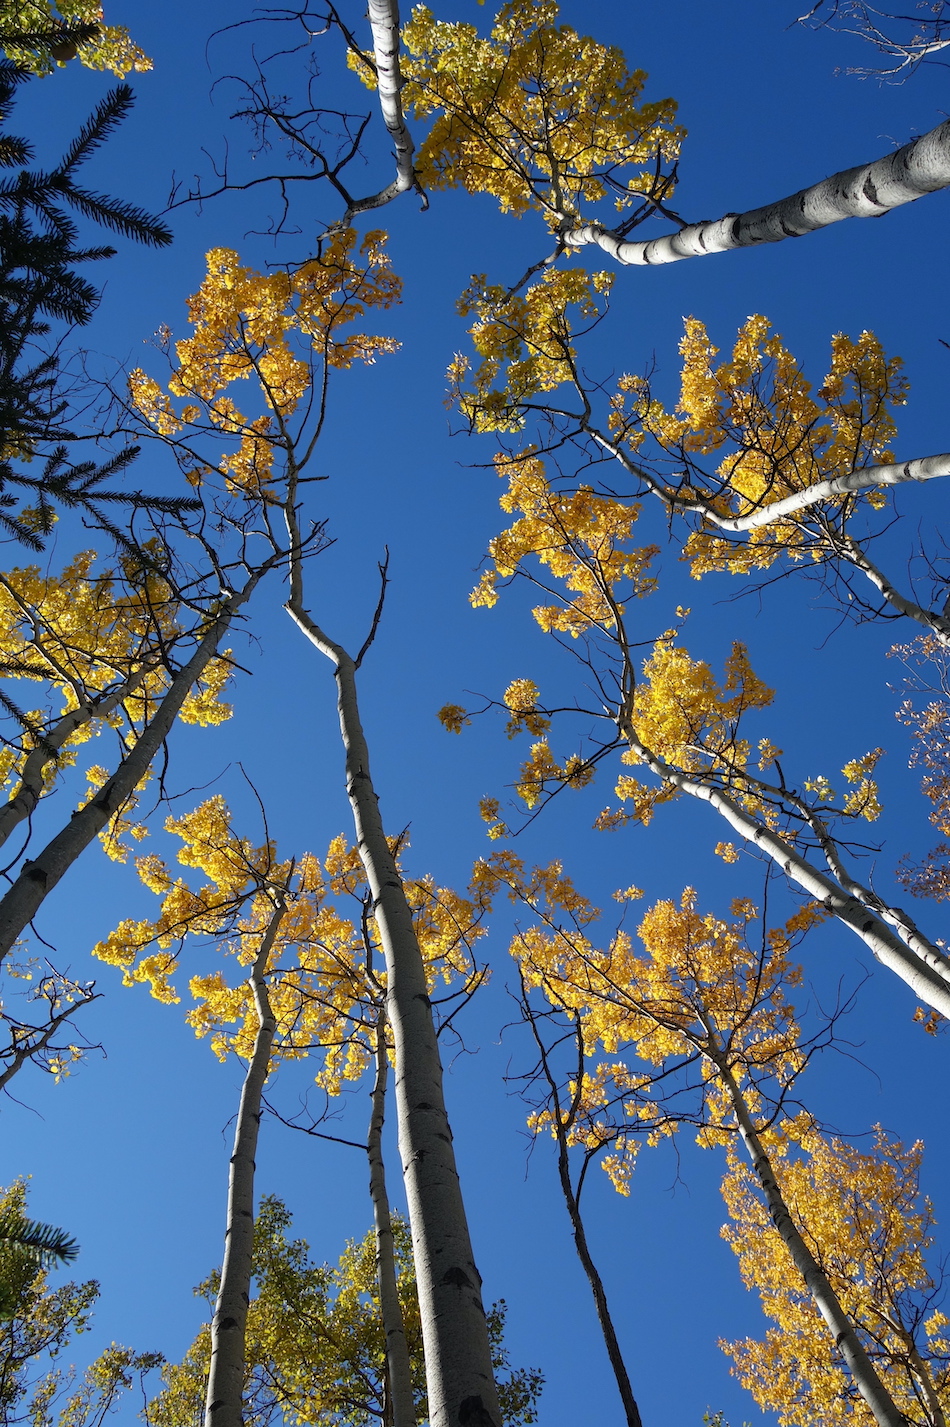 Aspens bearing yellow leaves rise into a blue sky.